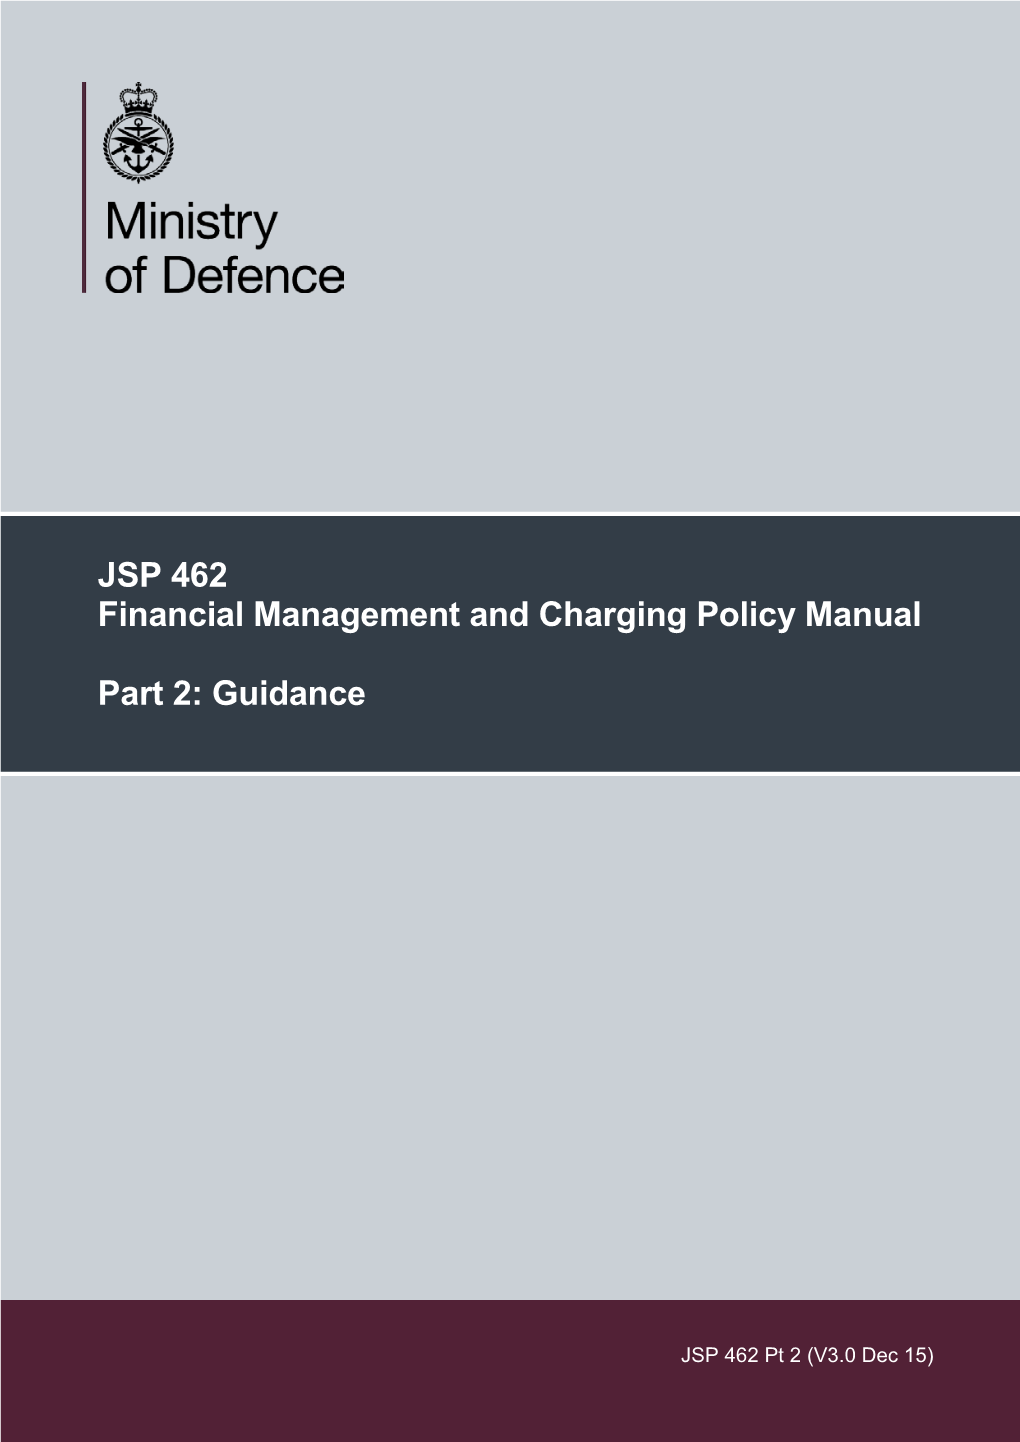 JSP 462 Part 2:Guidance-1St Consolidated DRAFT Under Revised Format